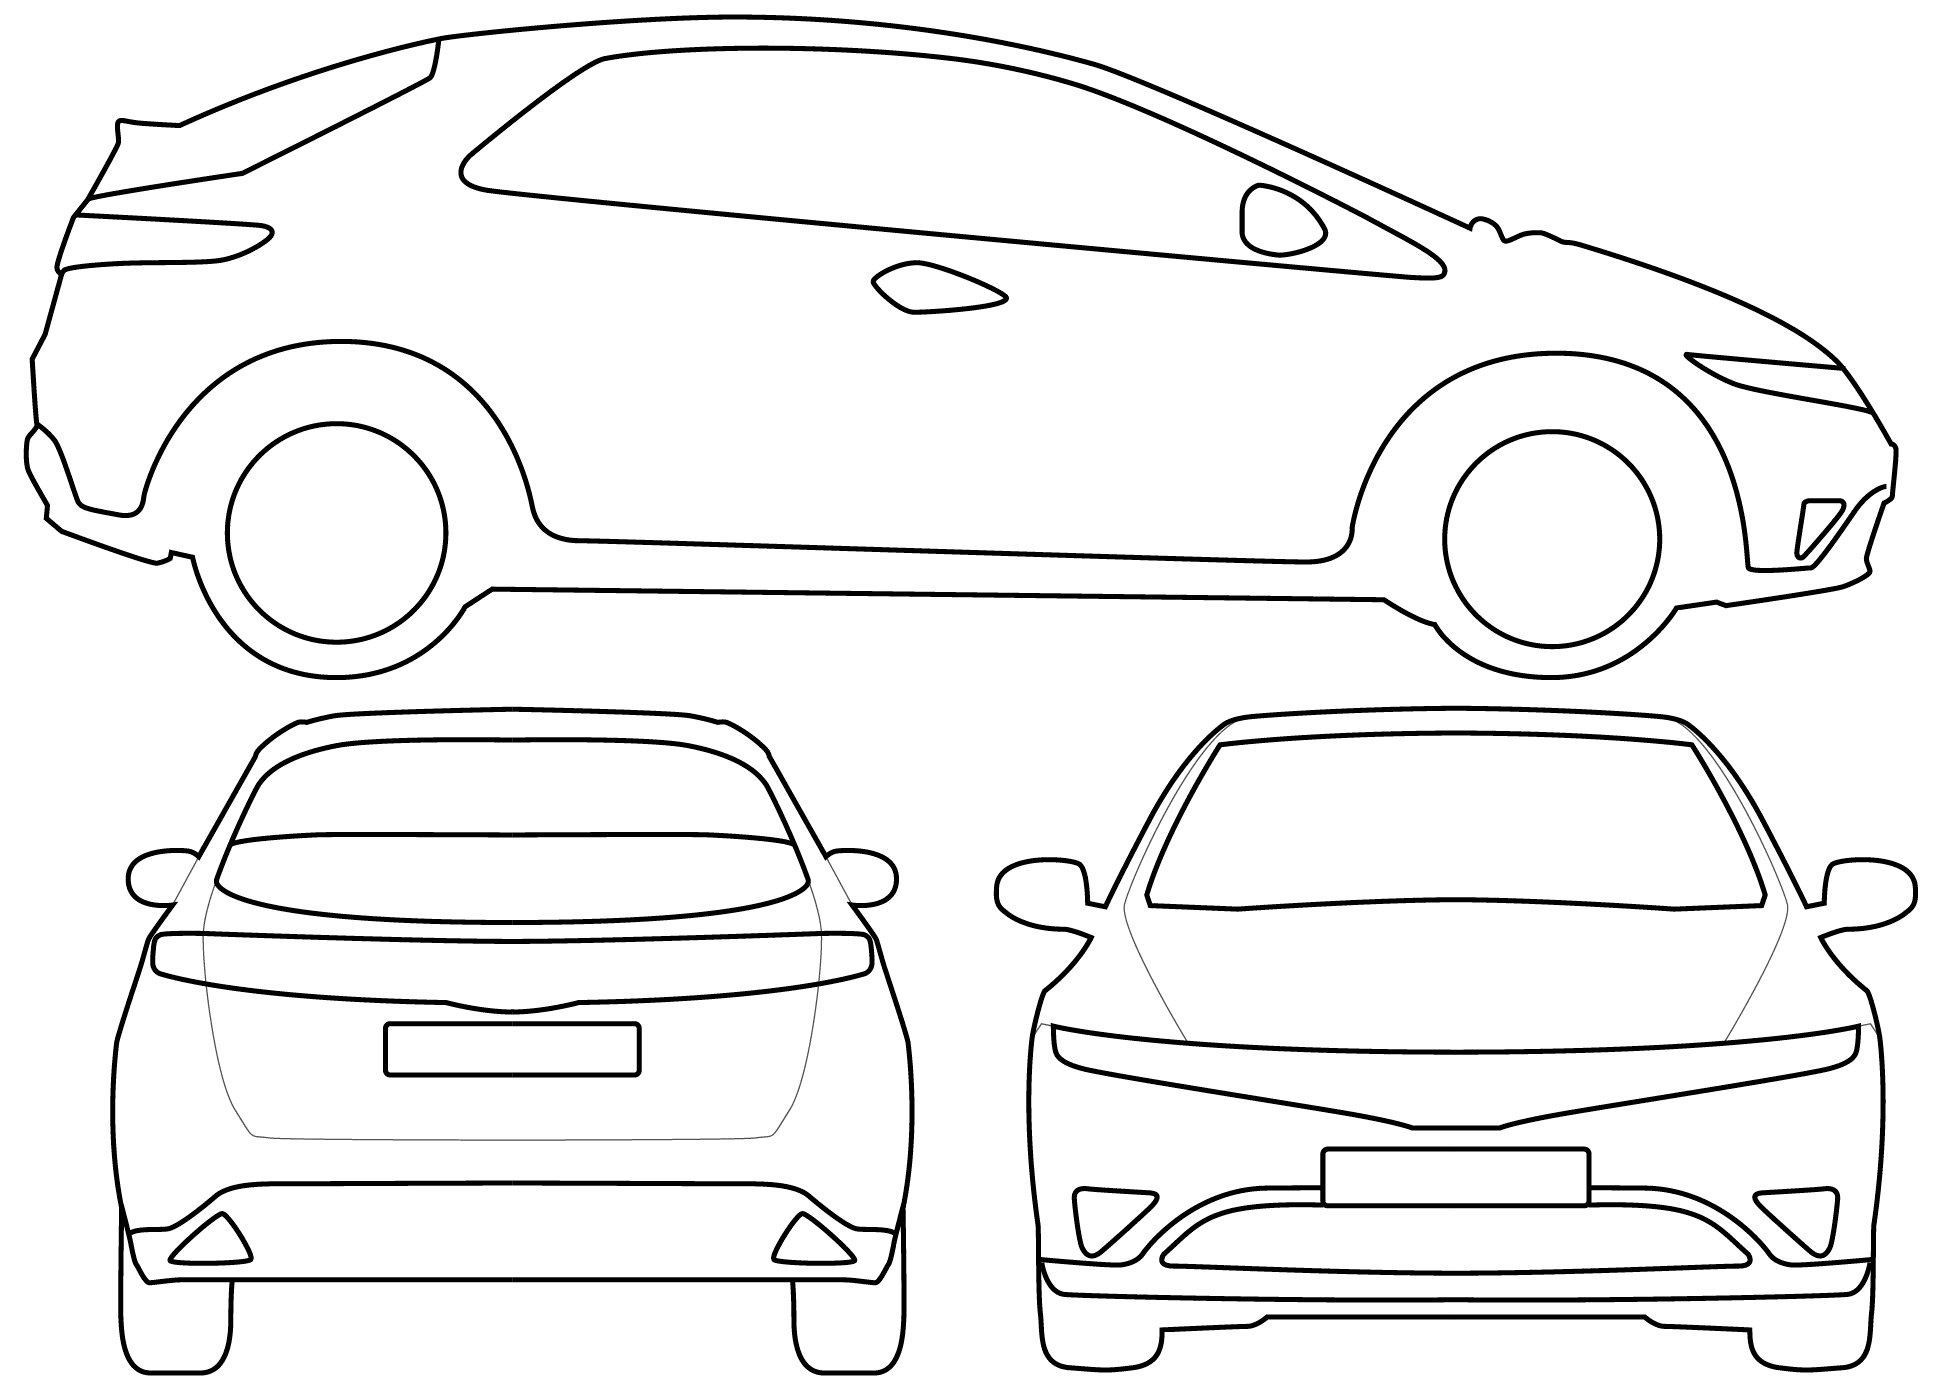 Honda Car coloring page - free printable coloring pages on coloori.com